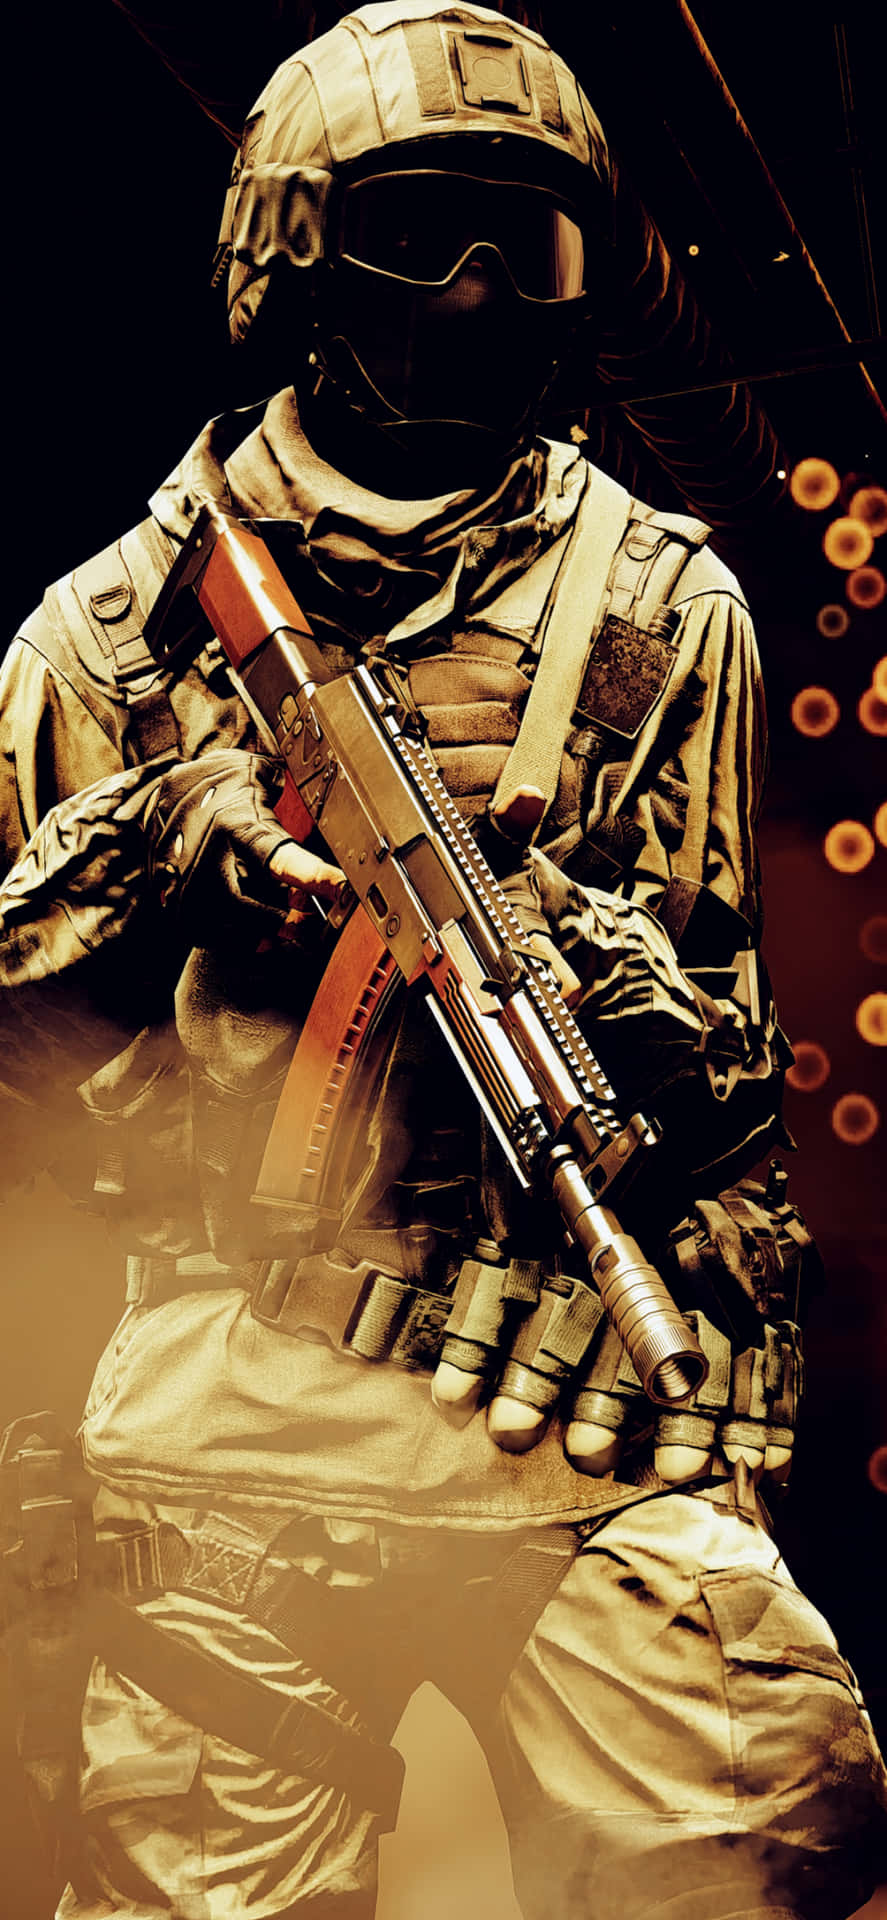 A Soldier Holding A Gun In Front Of A Dark Background